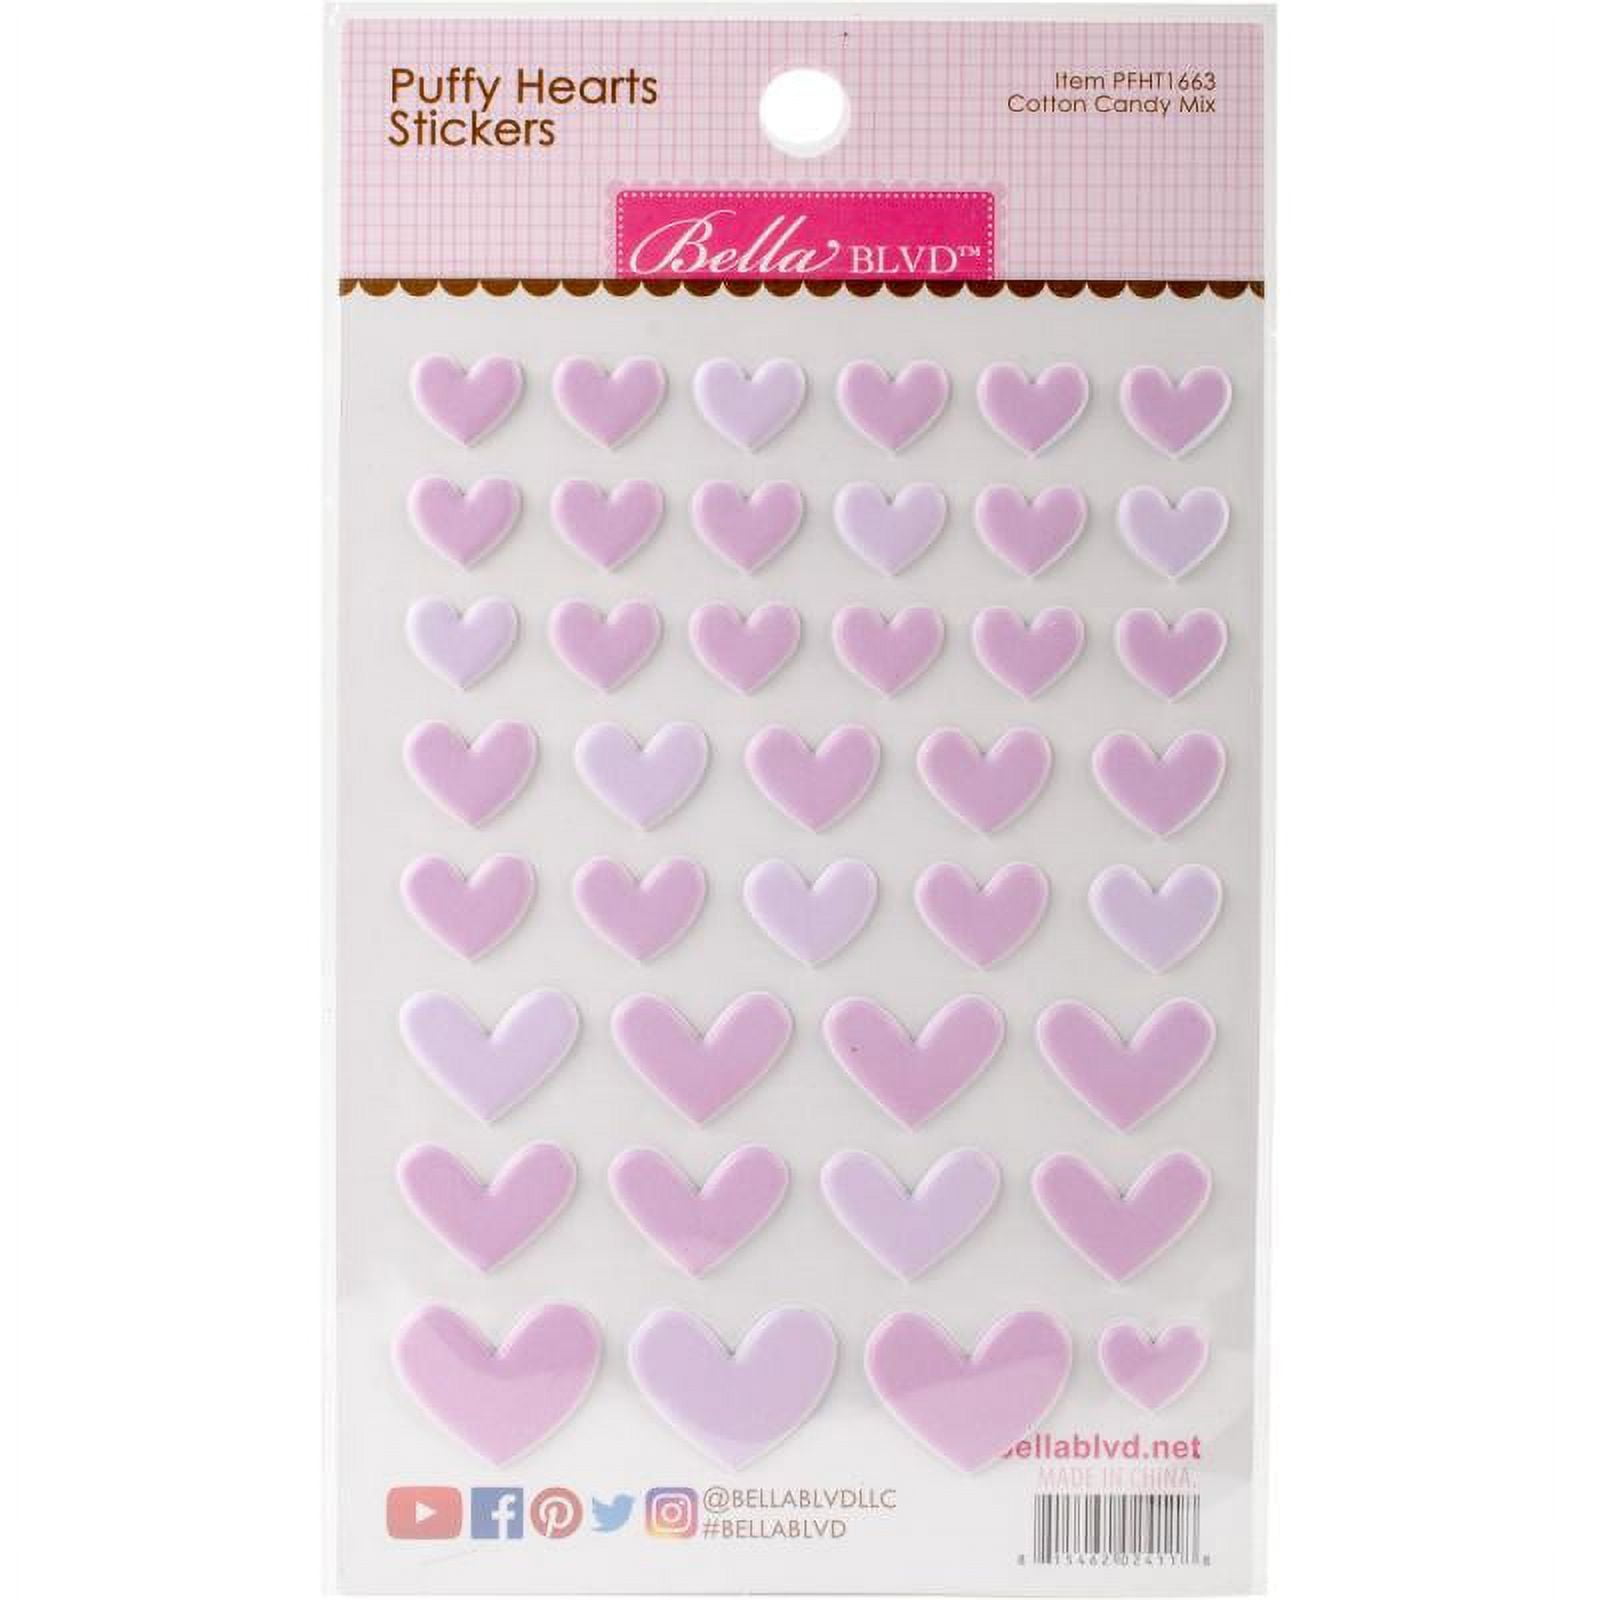 Puffy Heart Stickers - Cotton Candy Mix 